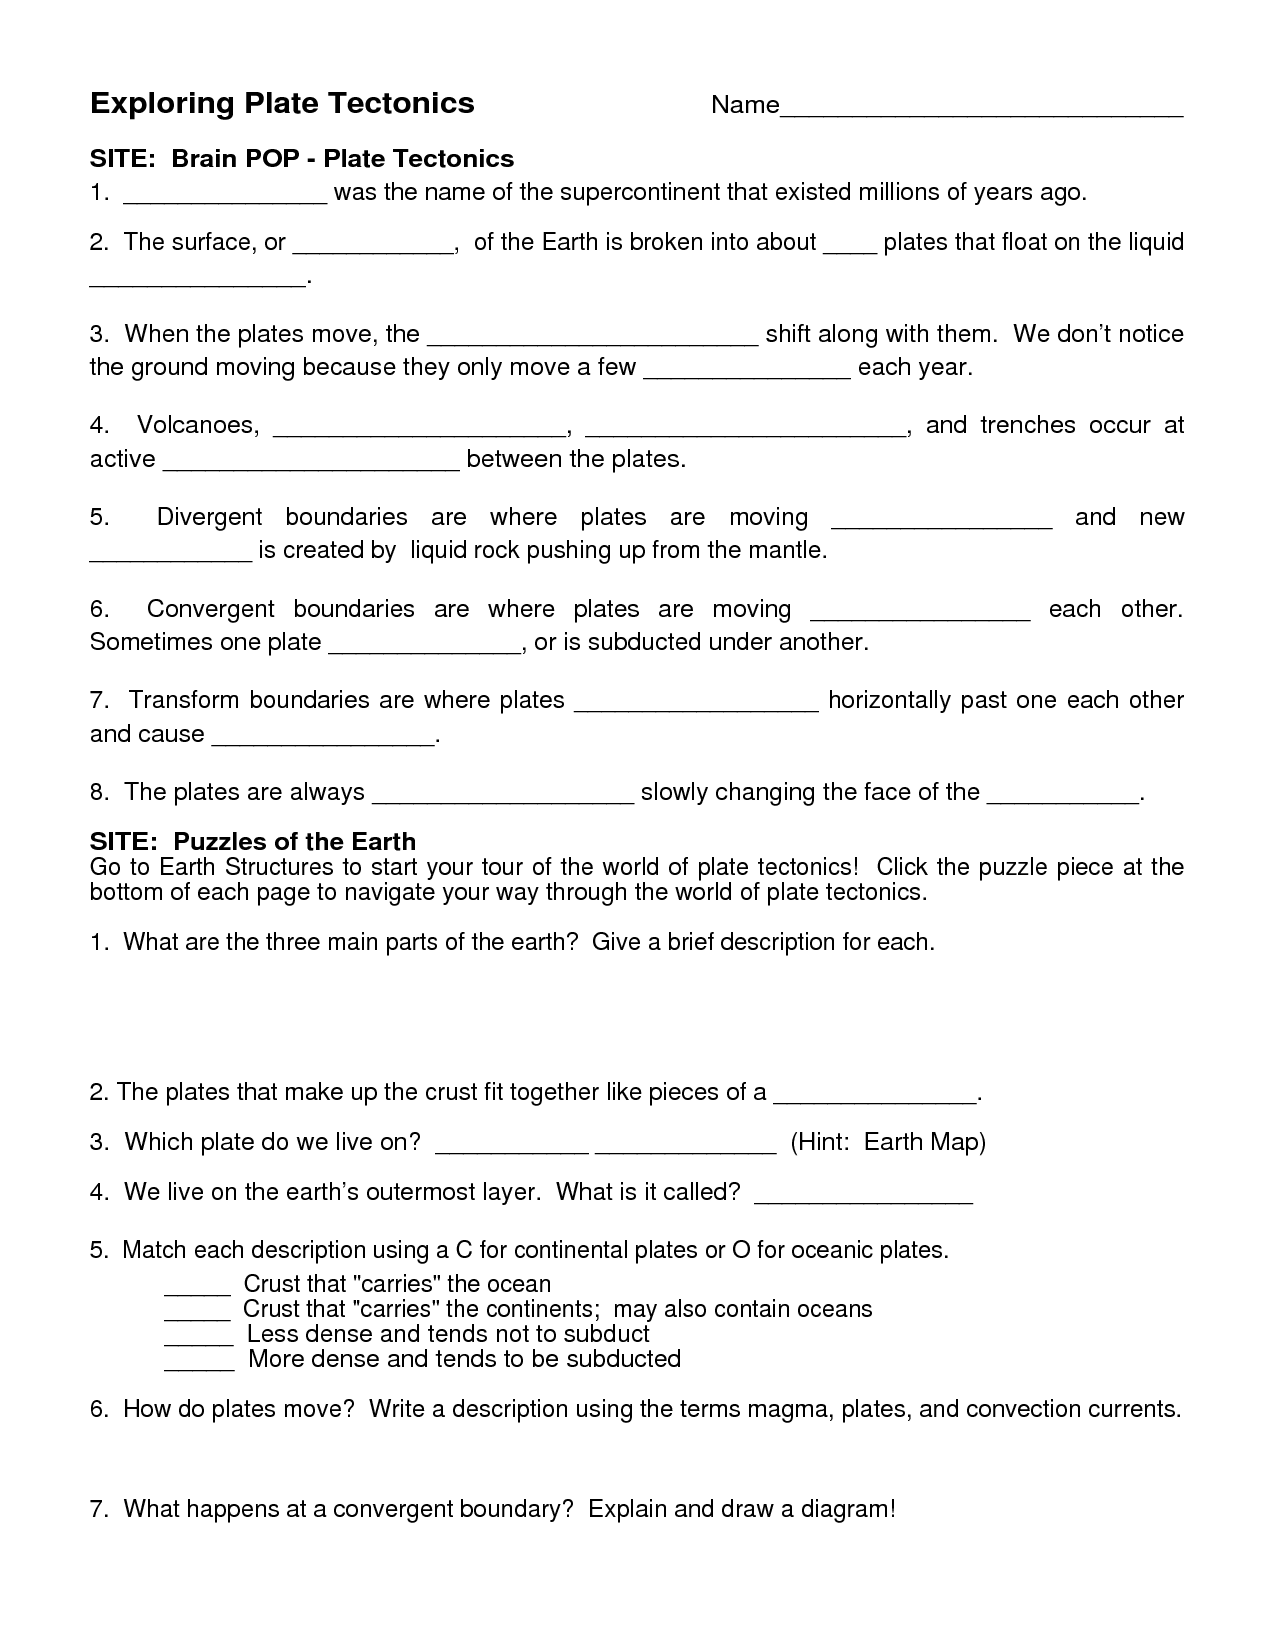 10 Best Images Of Inside The Earth Worksheet Blank Rock Cycle Worksheet Planet Earth 